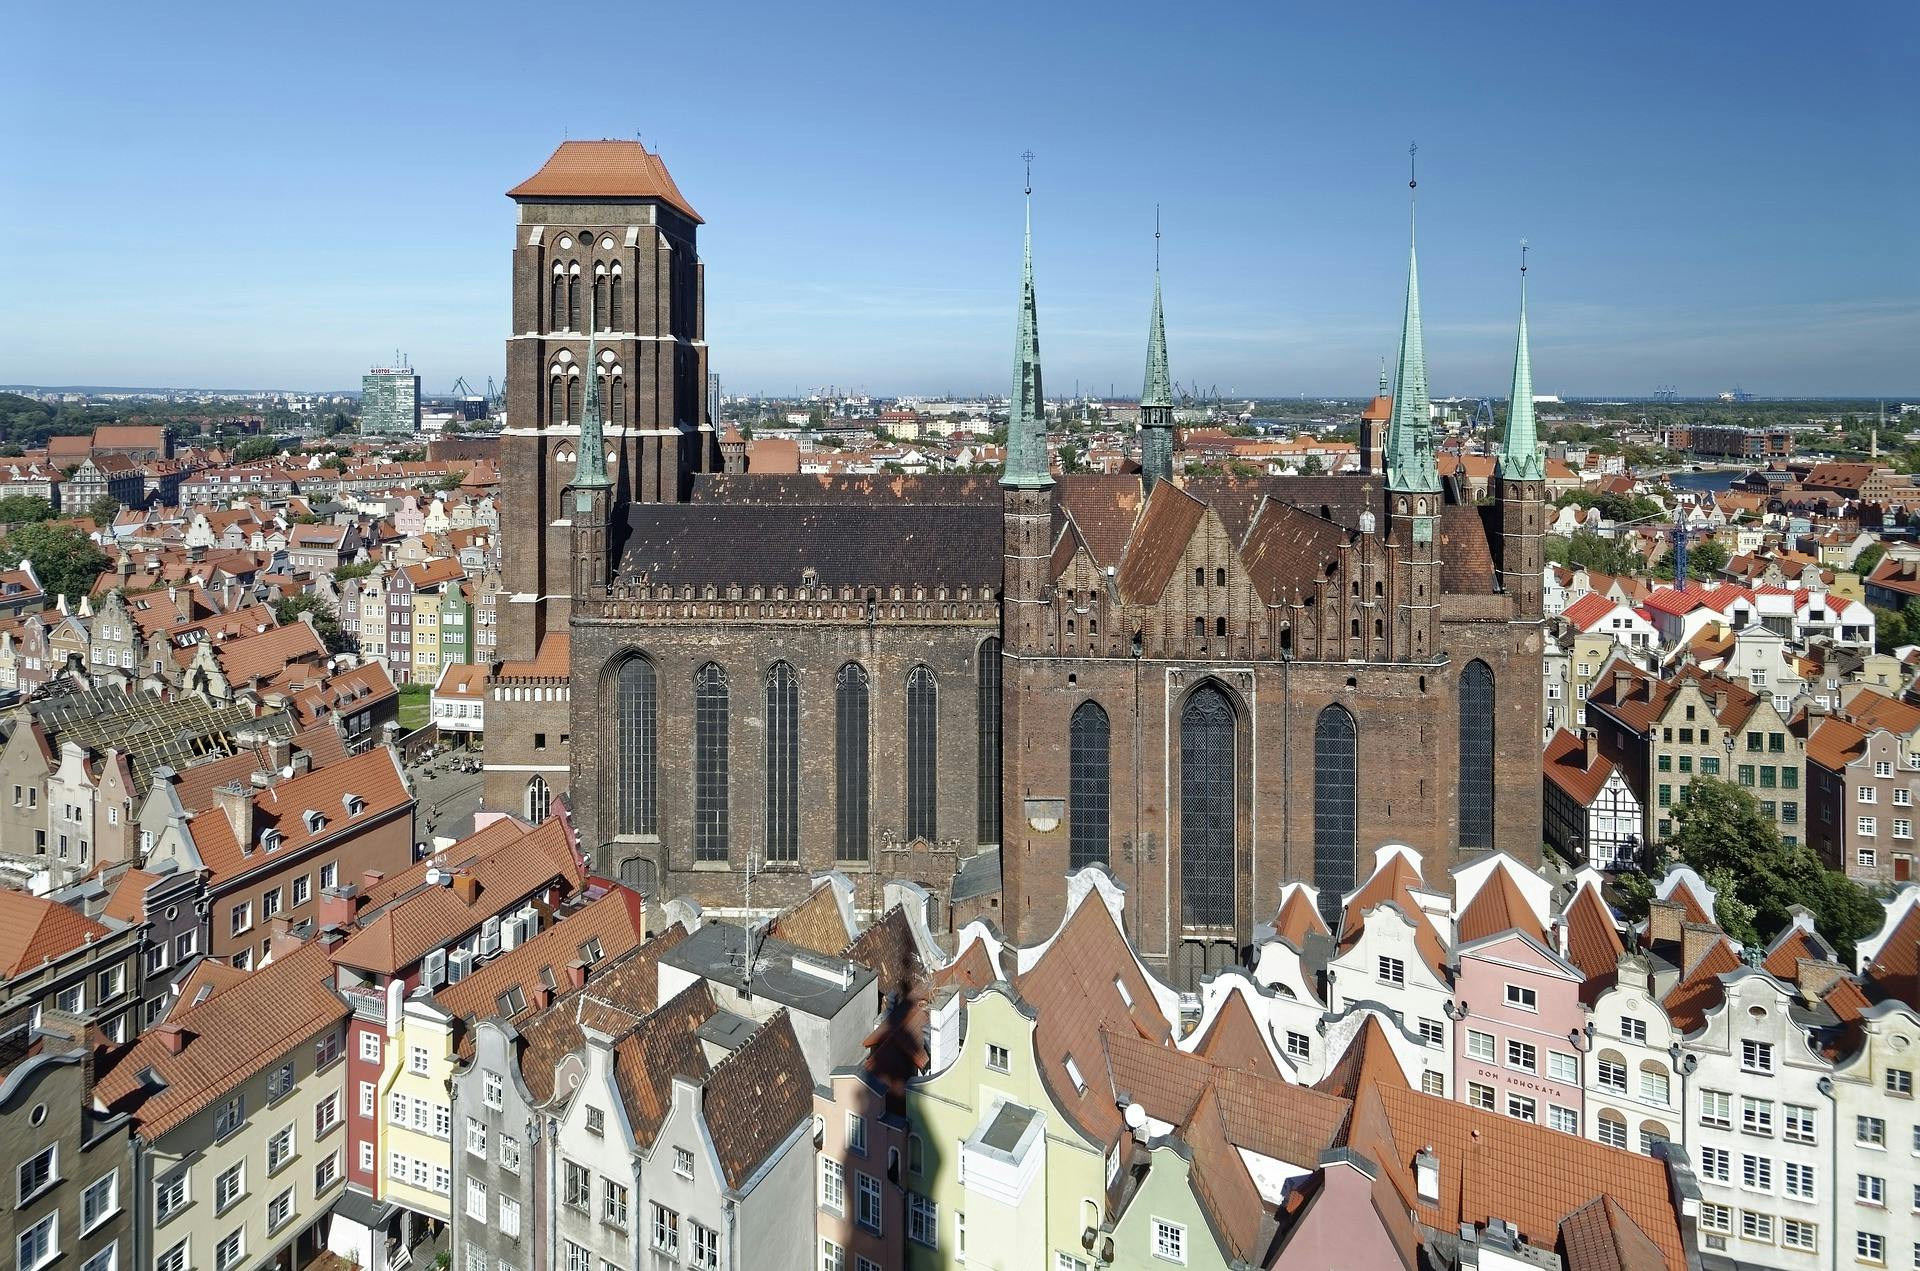 Self-guided tour of Gdansk by Audio Guide Gdansk 5